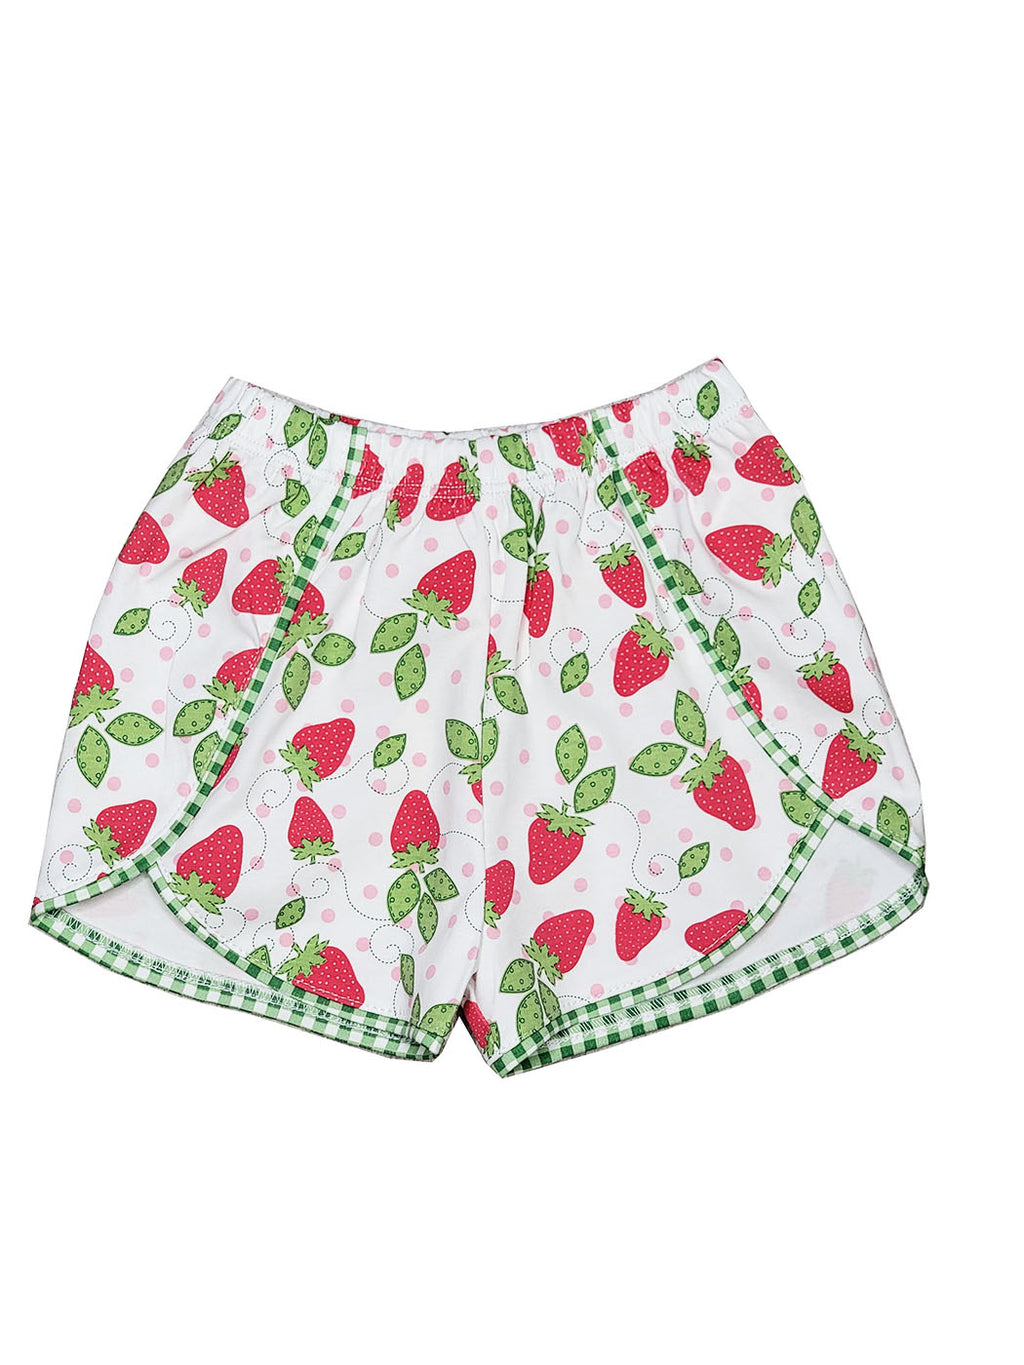 Girl's "Strawberry Patch" printed shorts - Little Threads Inc. Children's Clothing